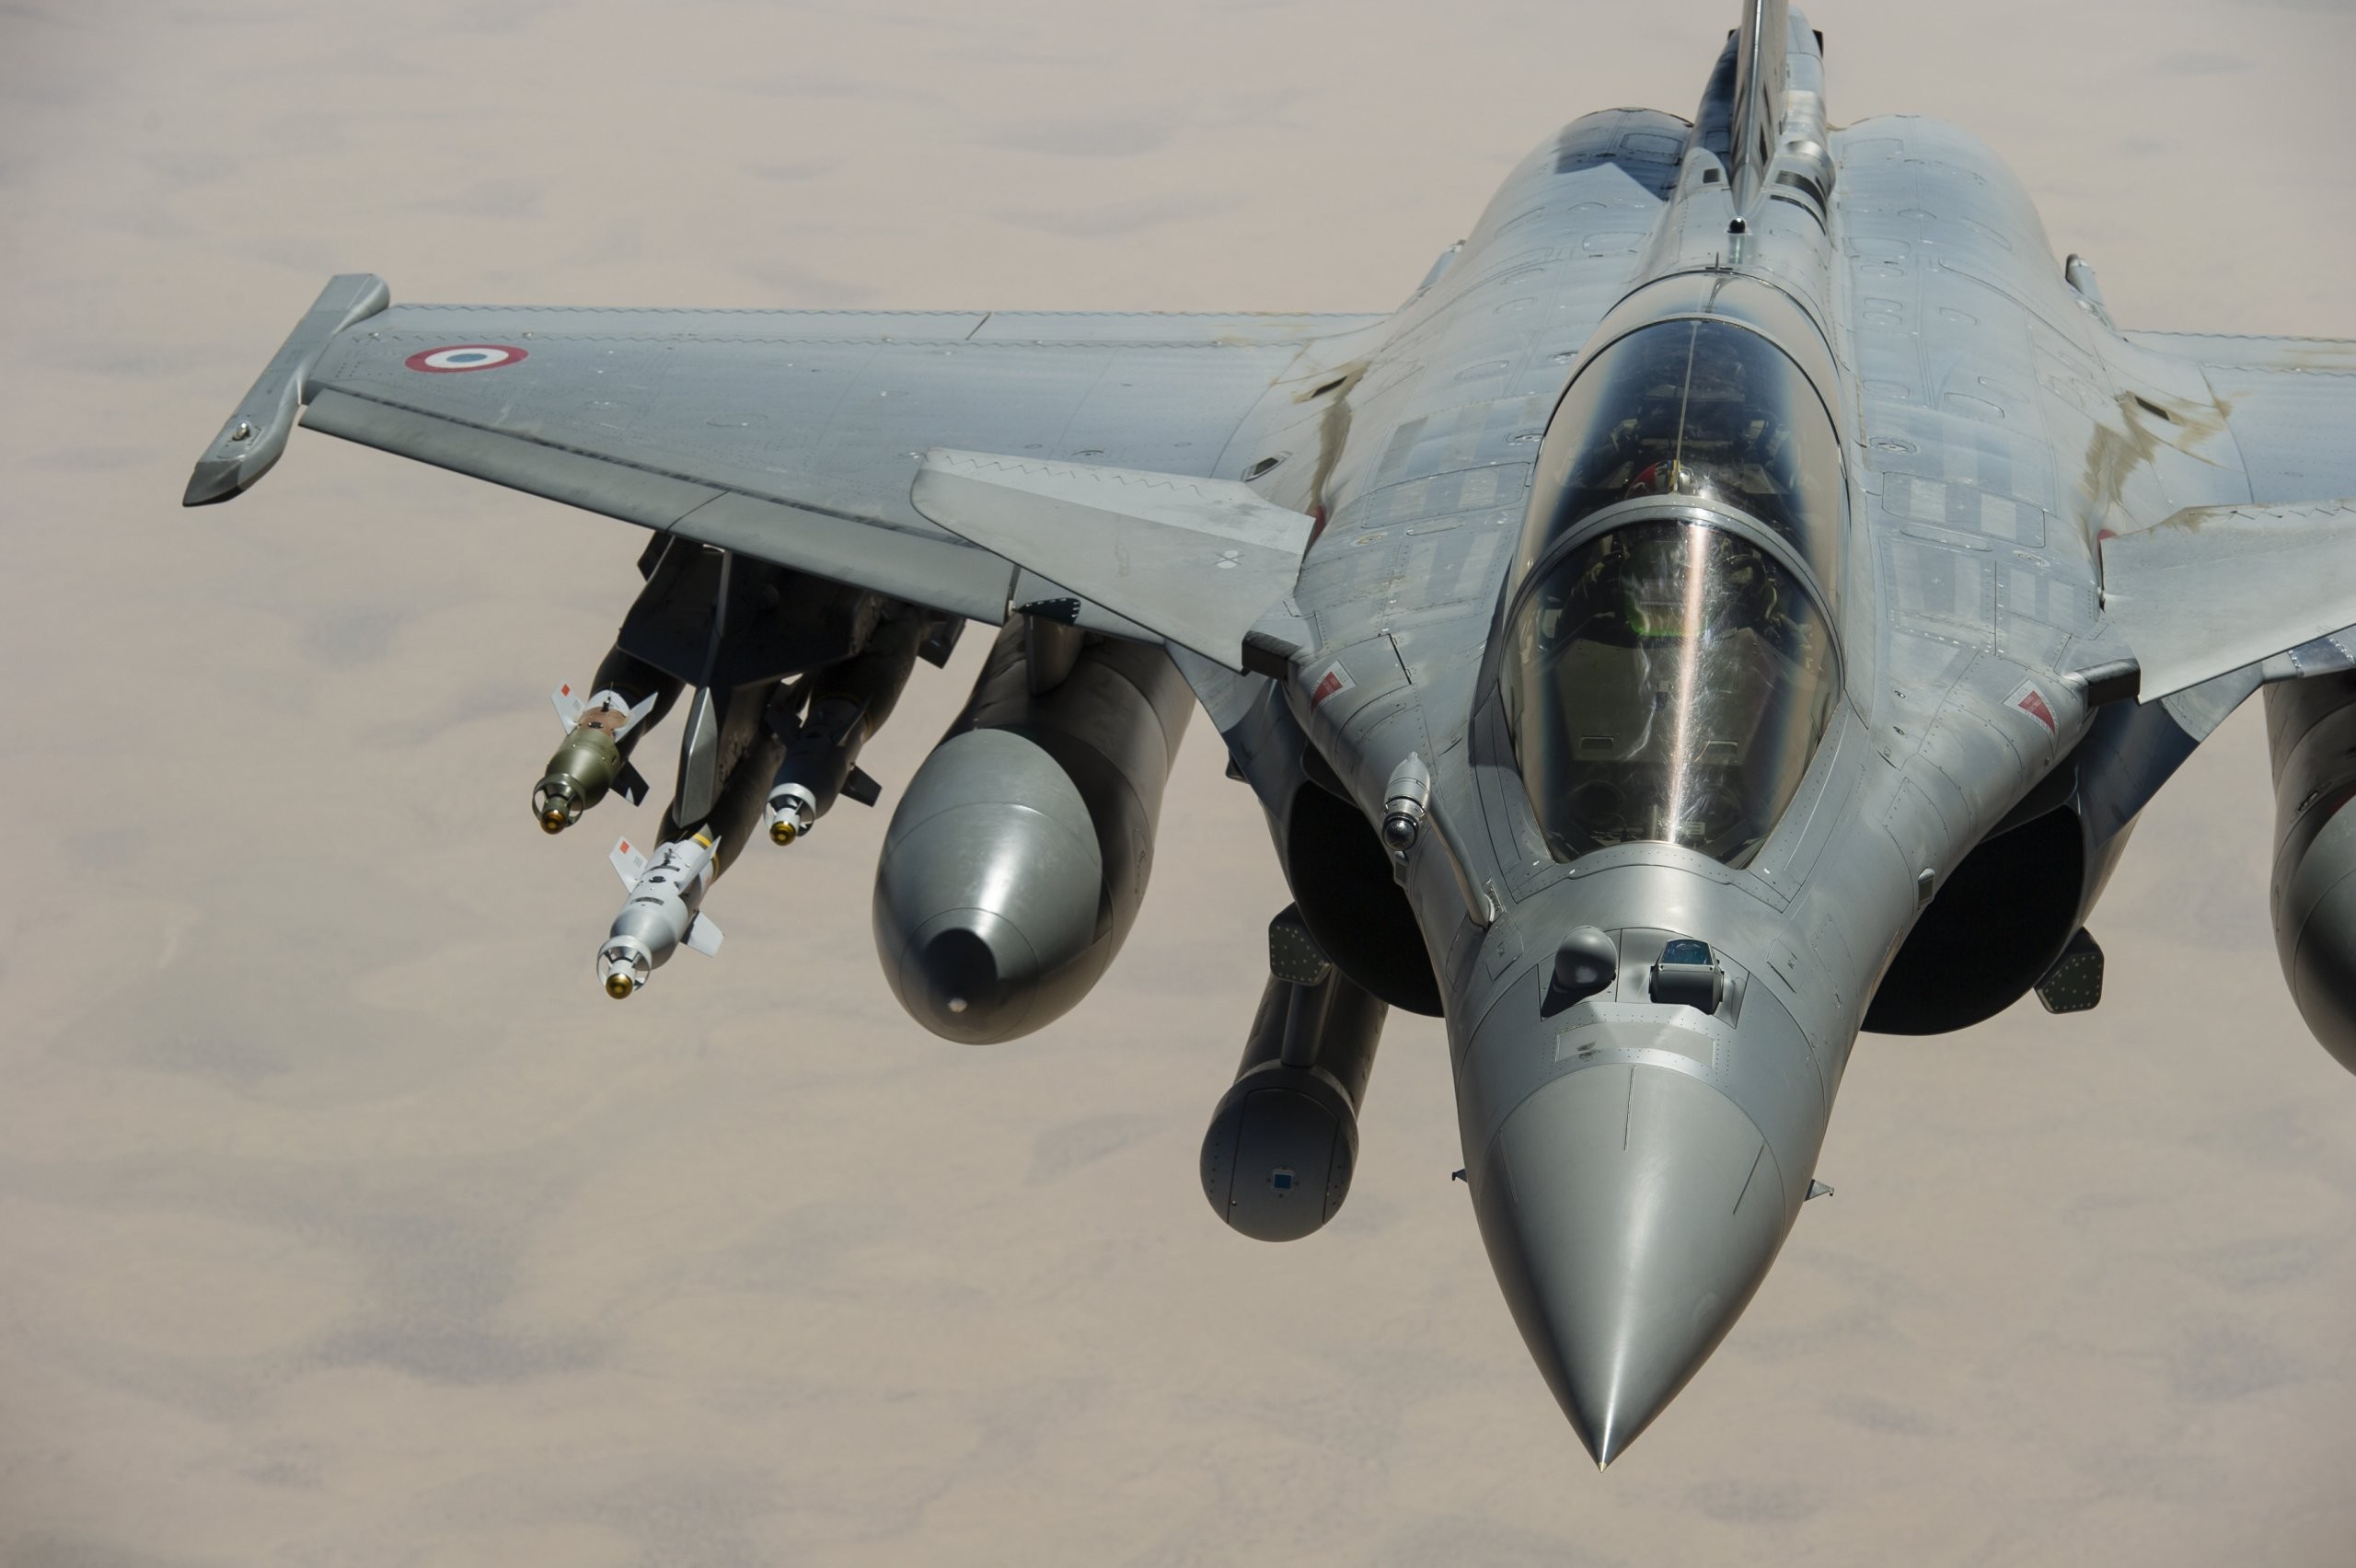 General 2560x1704 airplane jets Dassault Rafale military aircraft aircraft military vehicle french aircraft Dassault Aviation